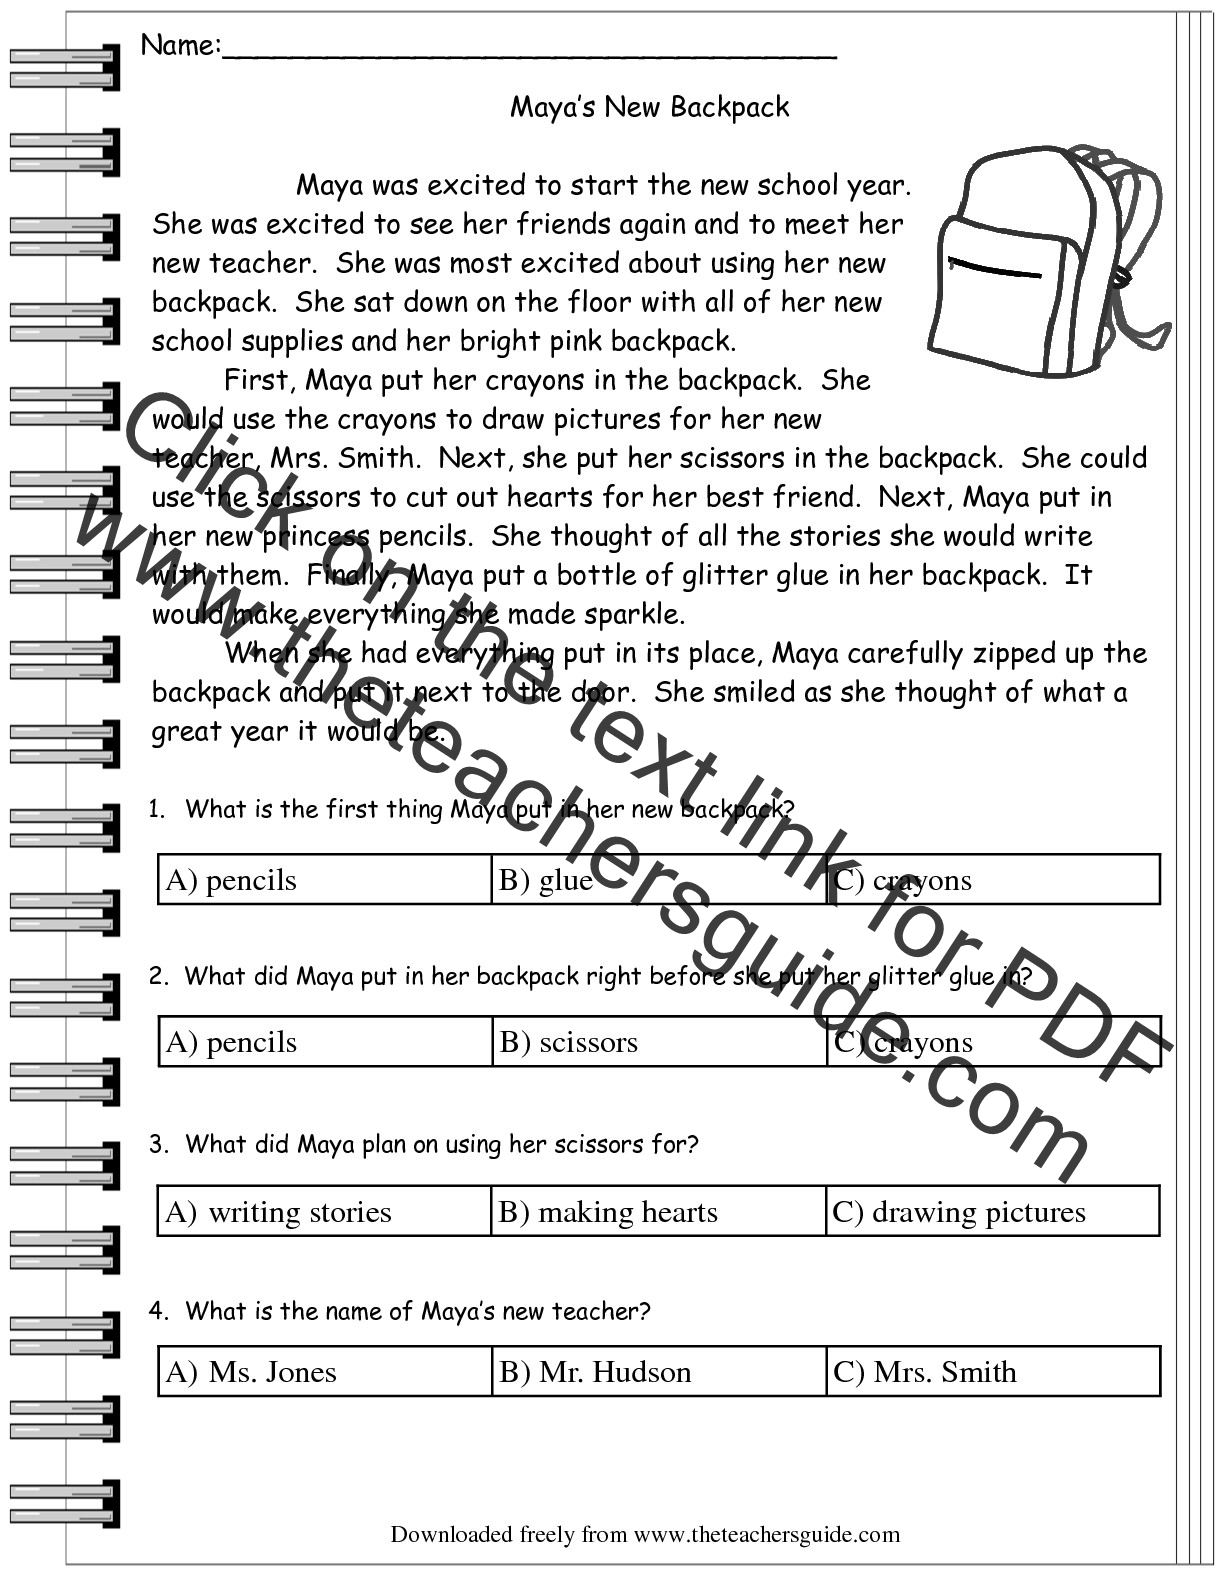 reading-comprehension-worksheet-with-multiple-choice-questions